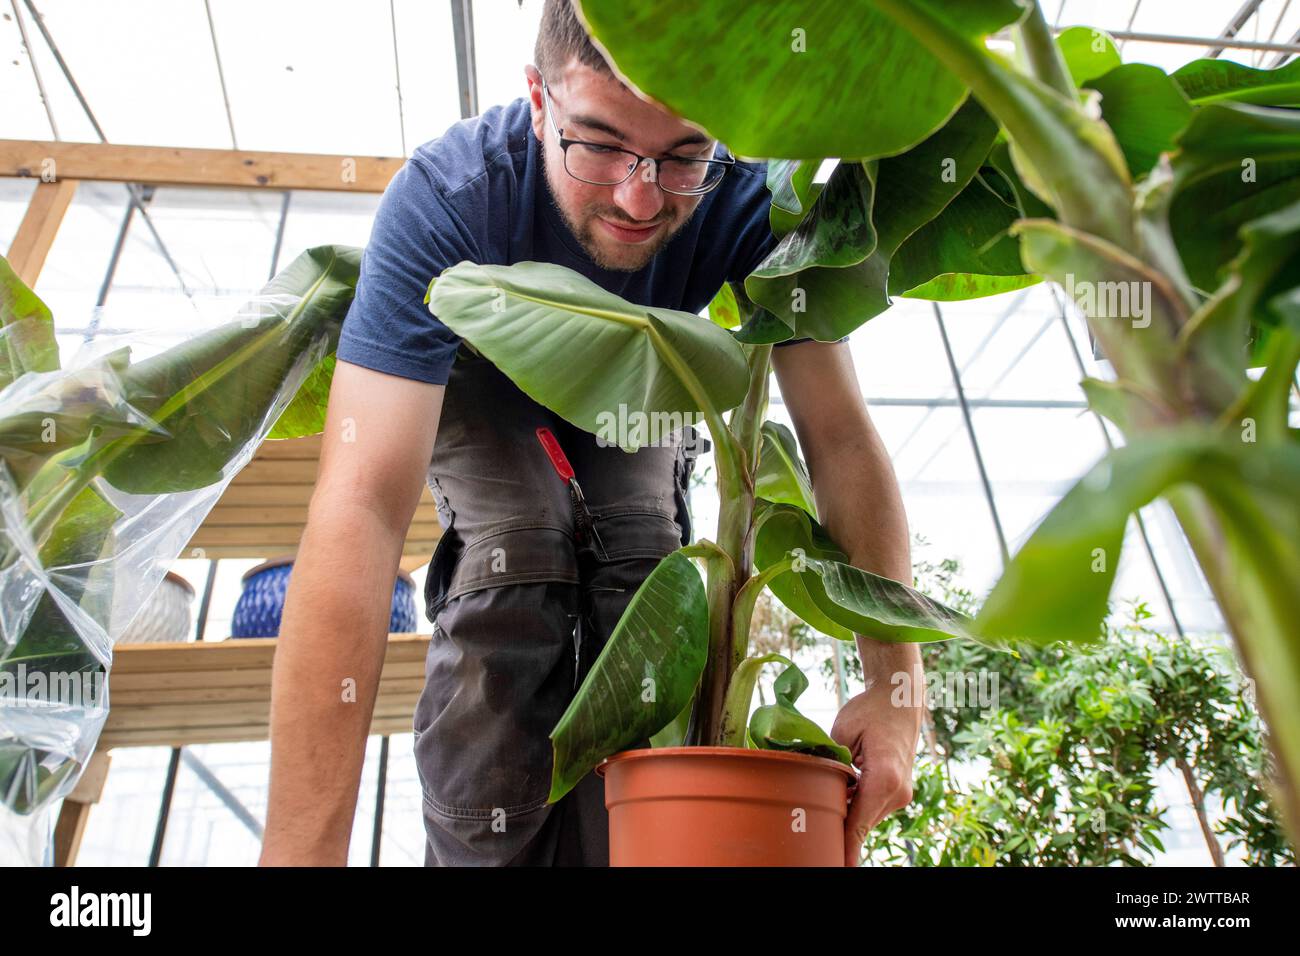 Man attentively caring for a large potted plant in a sunny greenhouse. Stock Photo